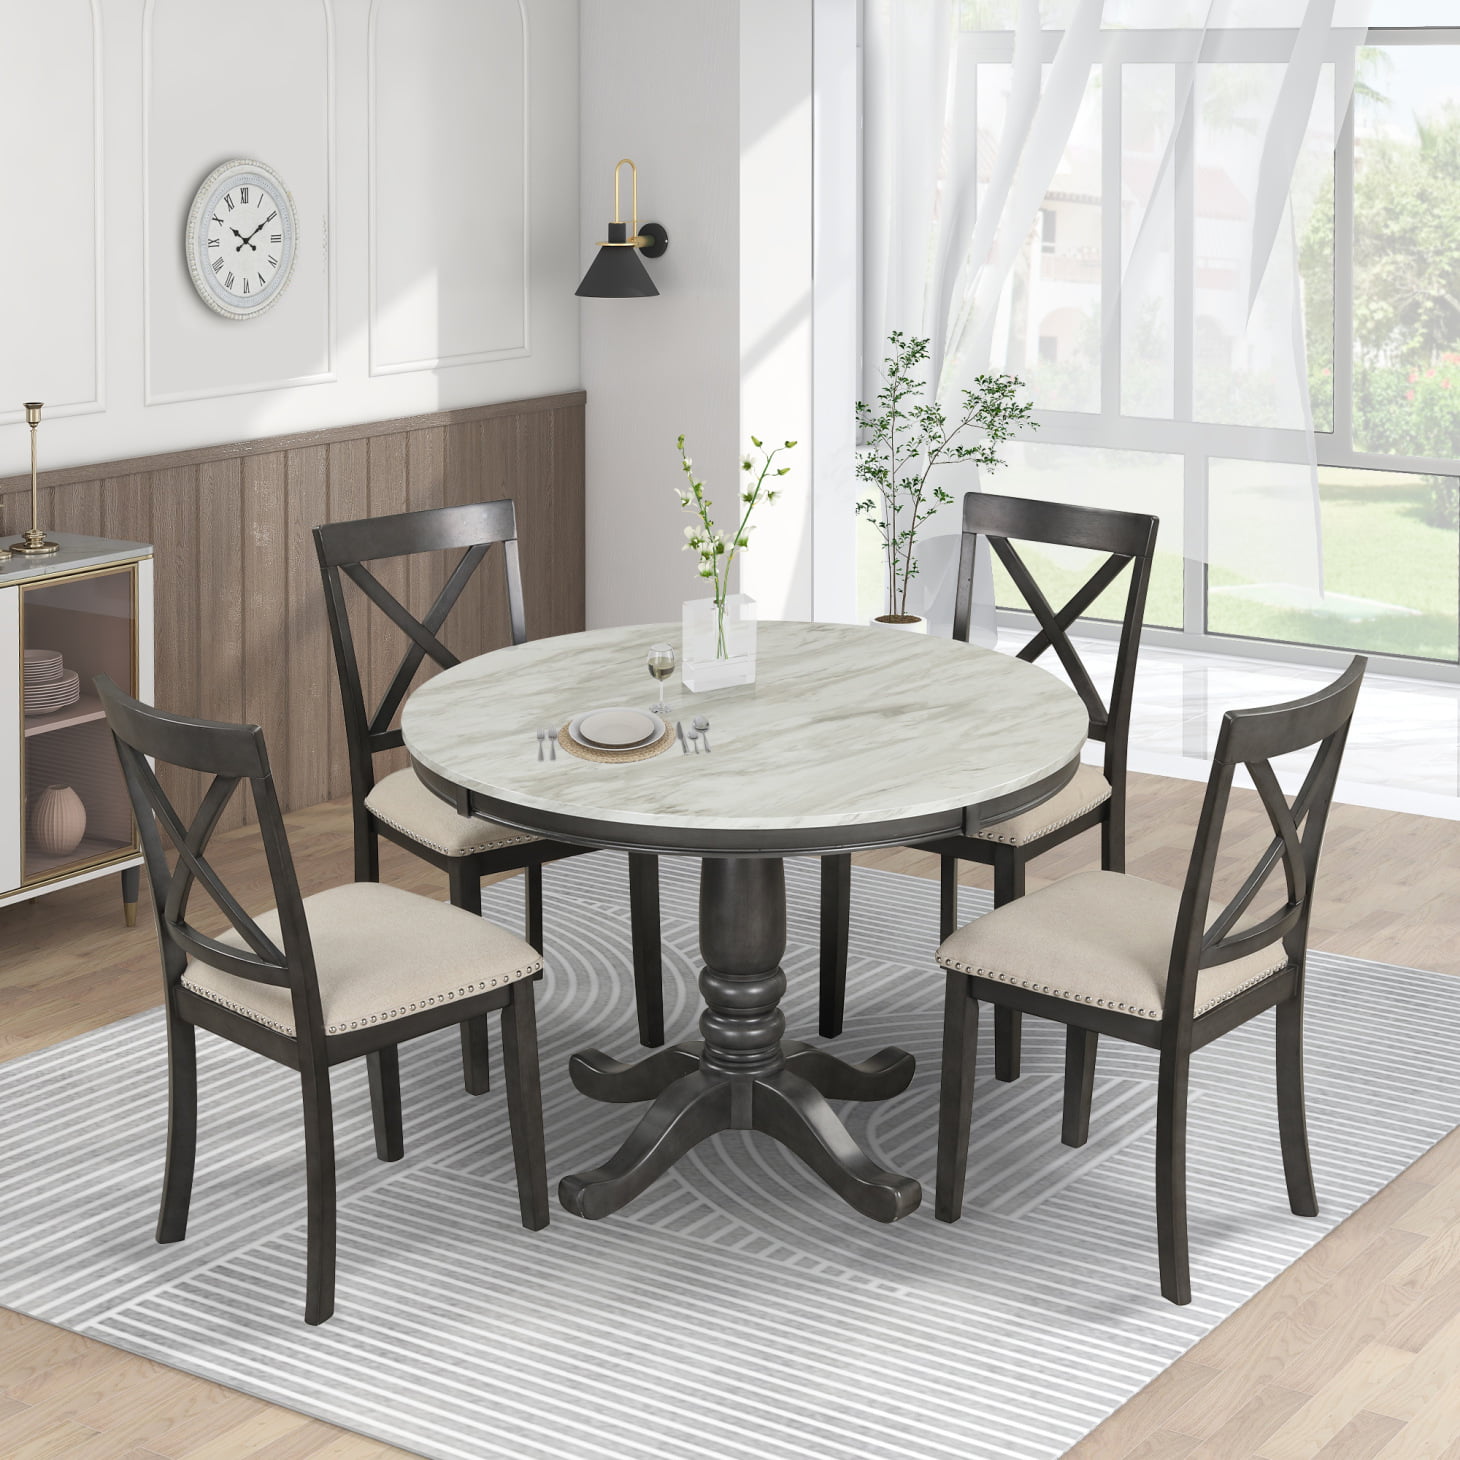 5 Pieces Dining Table and Chairs Set for 4 Persons, Kitchen Room Solid ...